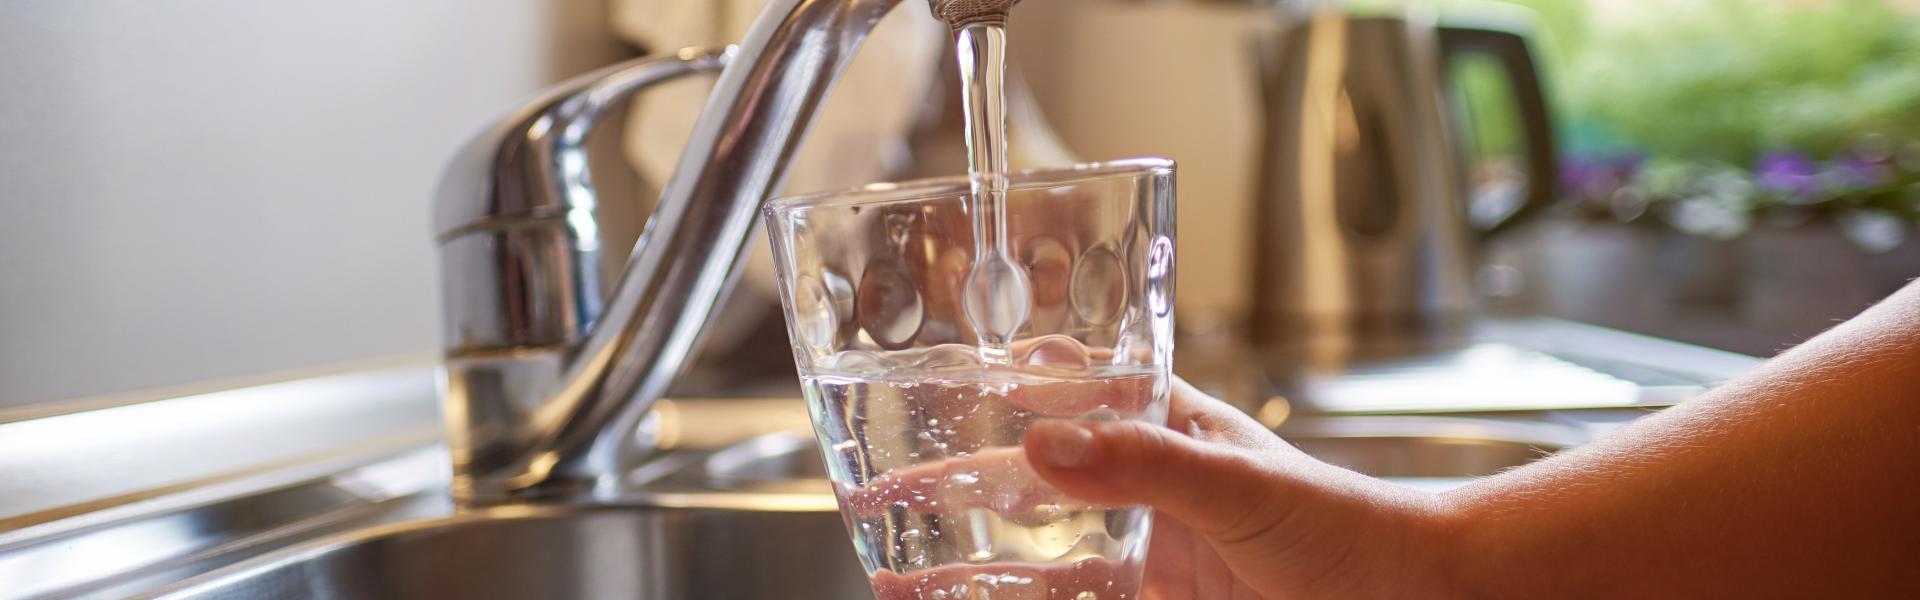 Person filling a glass of water under tap